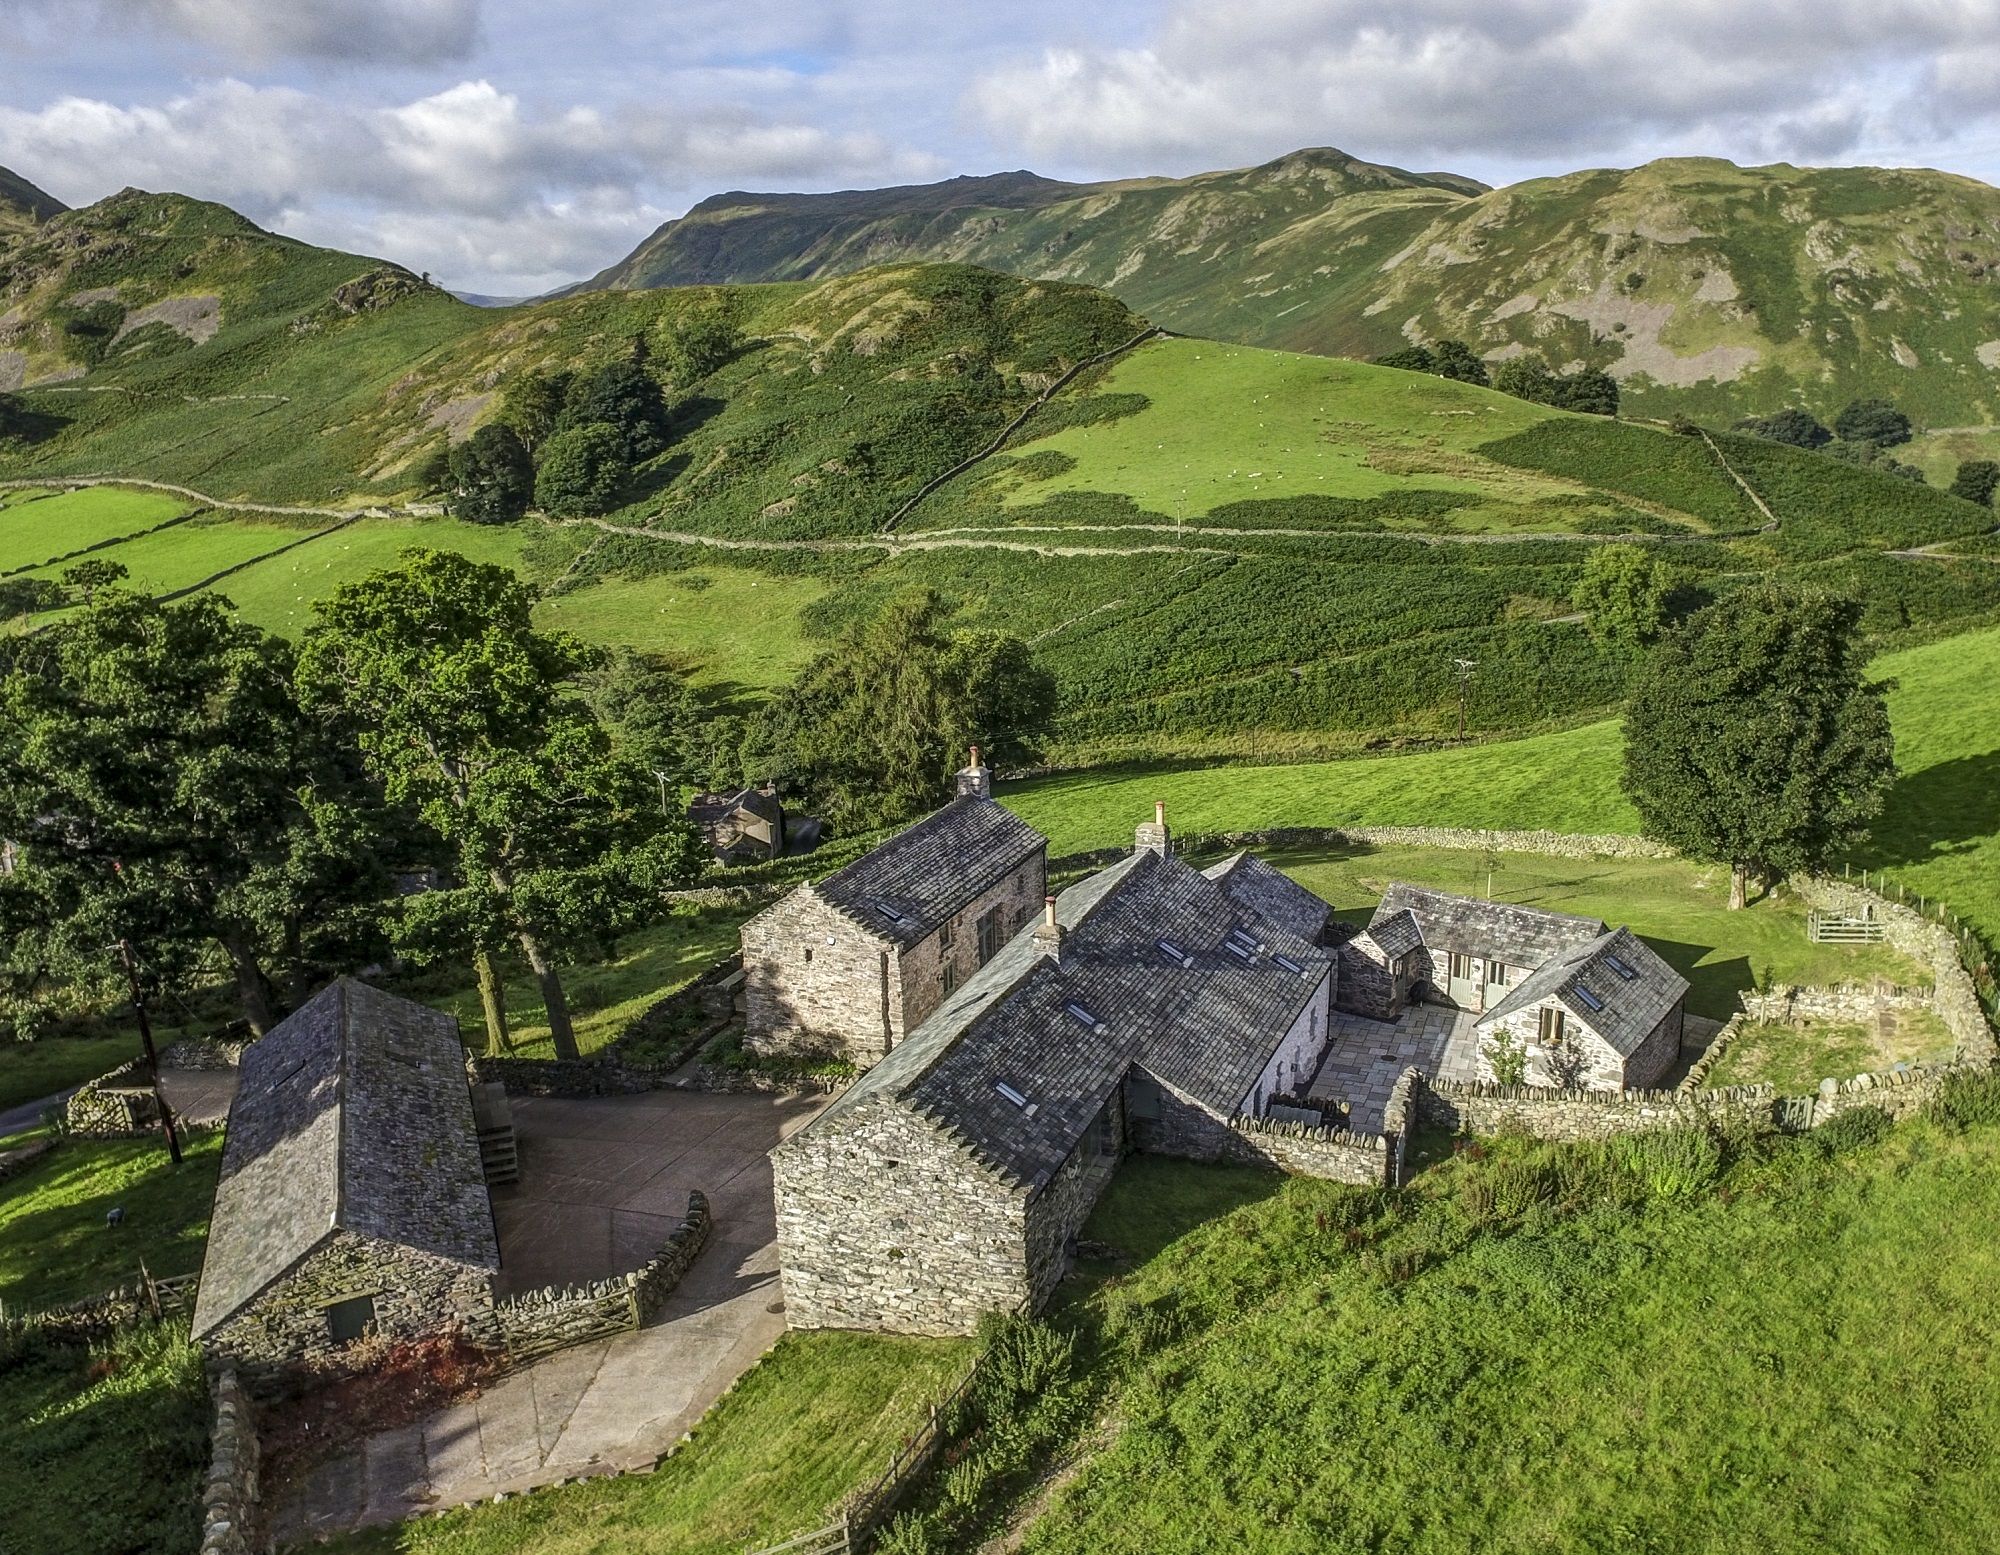 Hause Hall Farm luxury holiday cottage at The Rowley Estates in the Lake District National Park